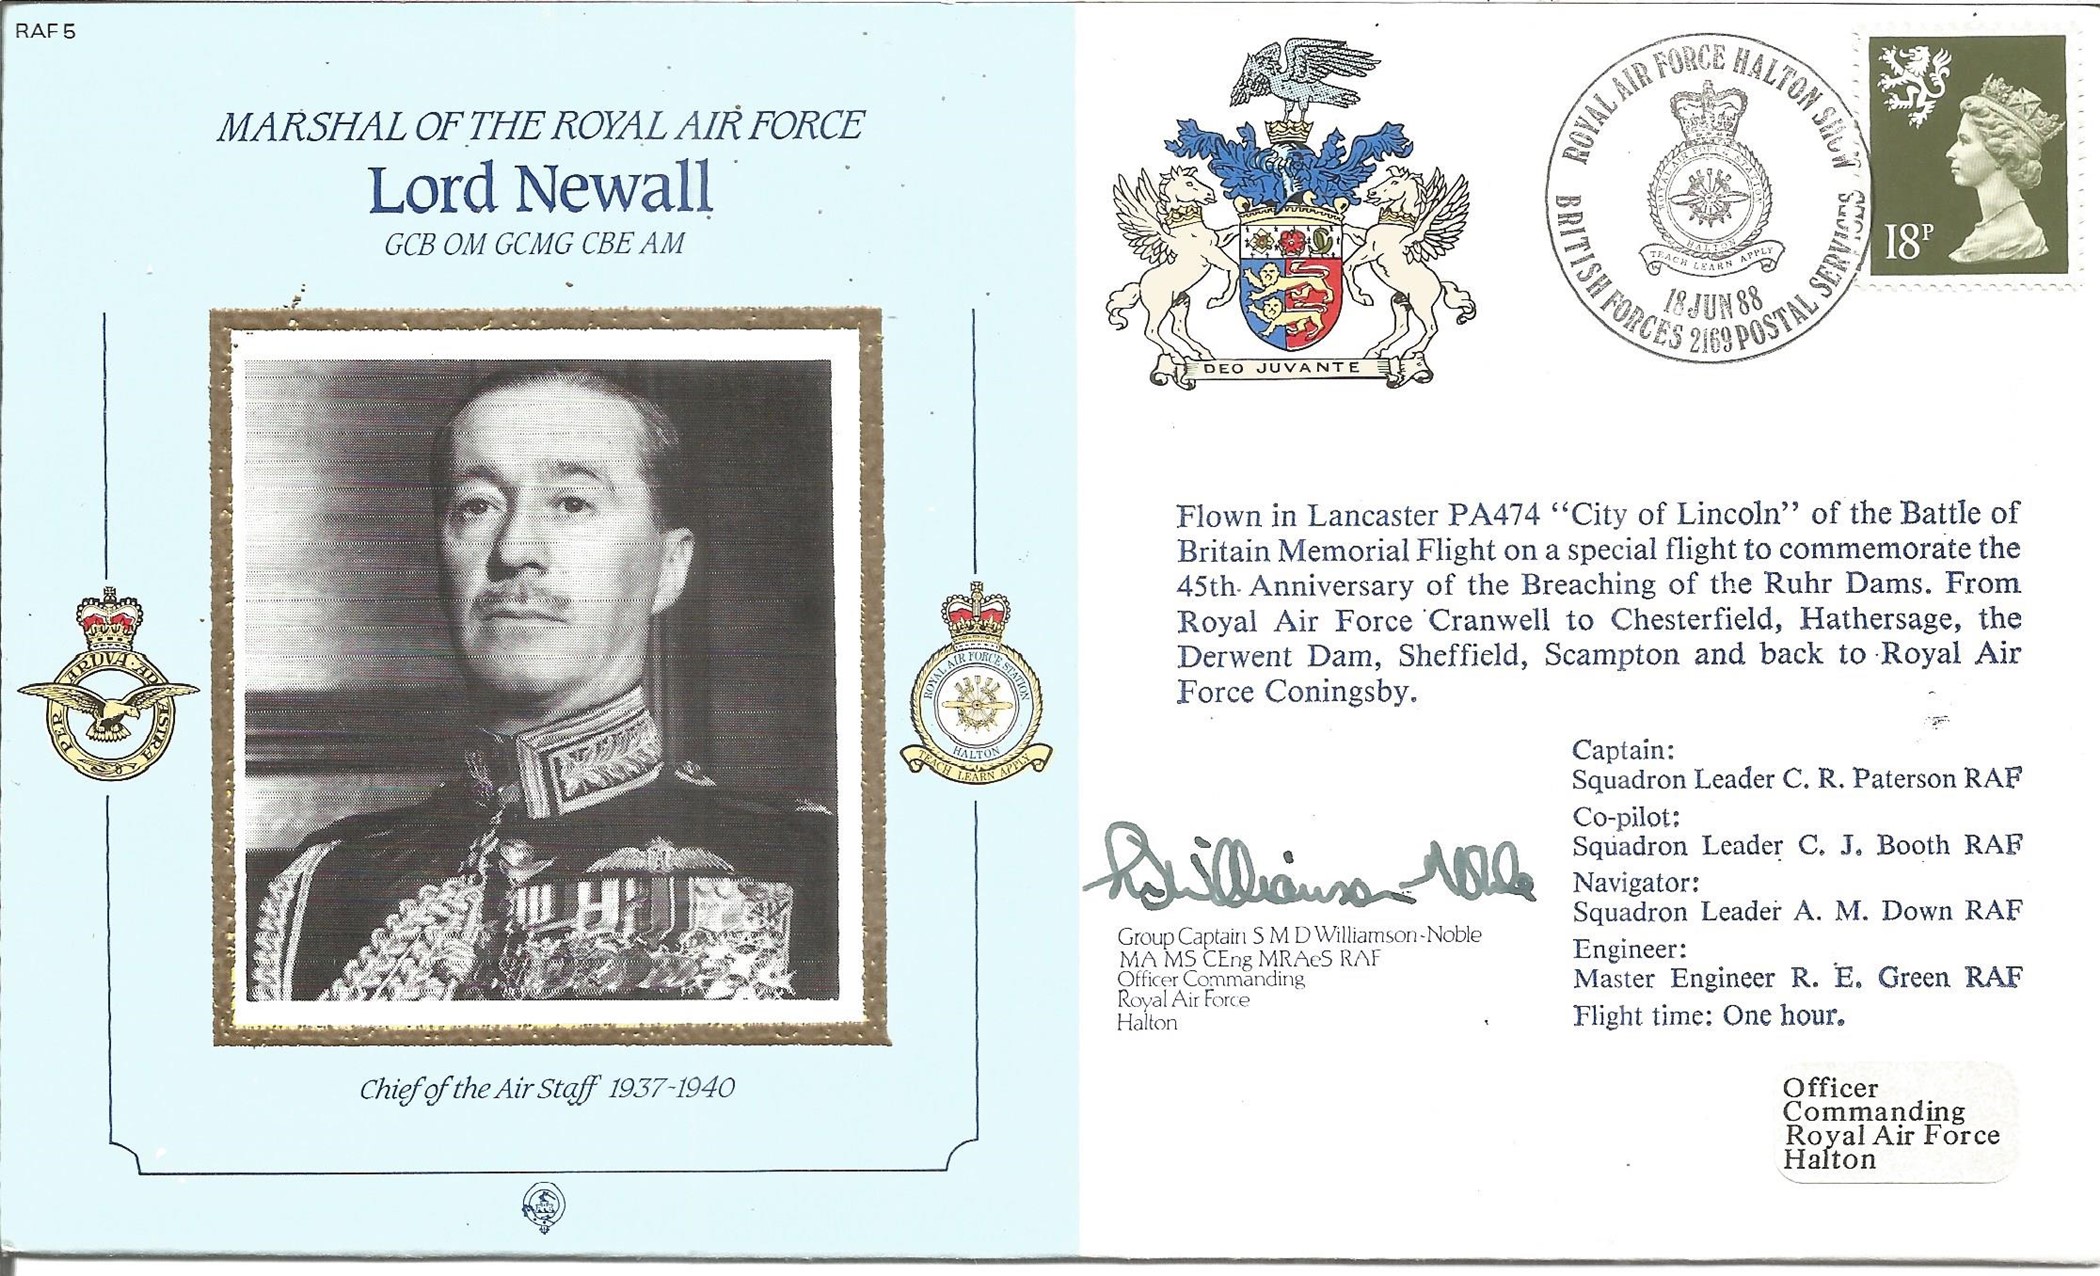 Lord Newall GCB OM GCMG CBE AM Chief of Air Staff 1937 1940 signed FDC No. 1033 of 1800. Flown In